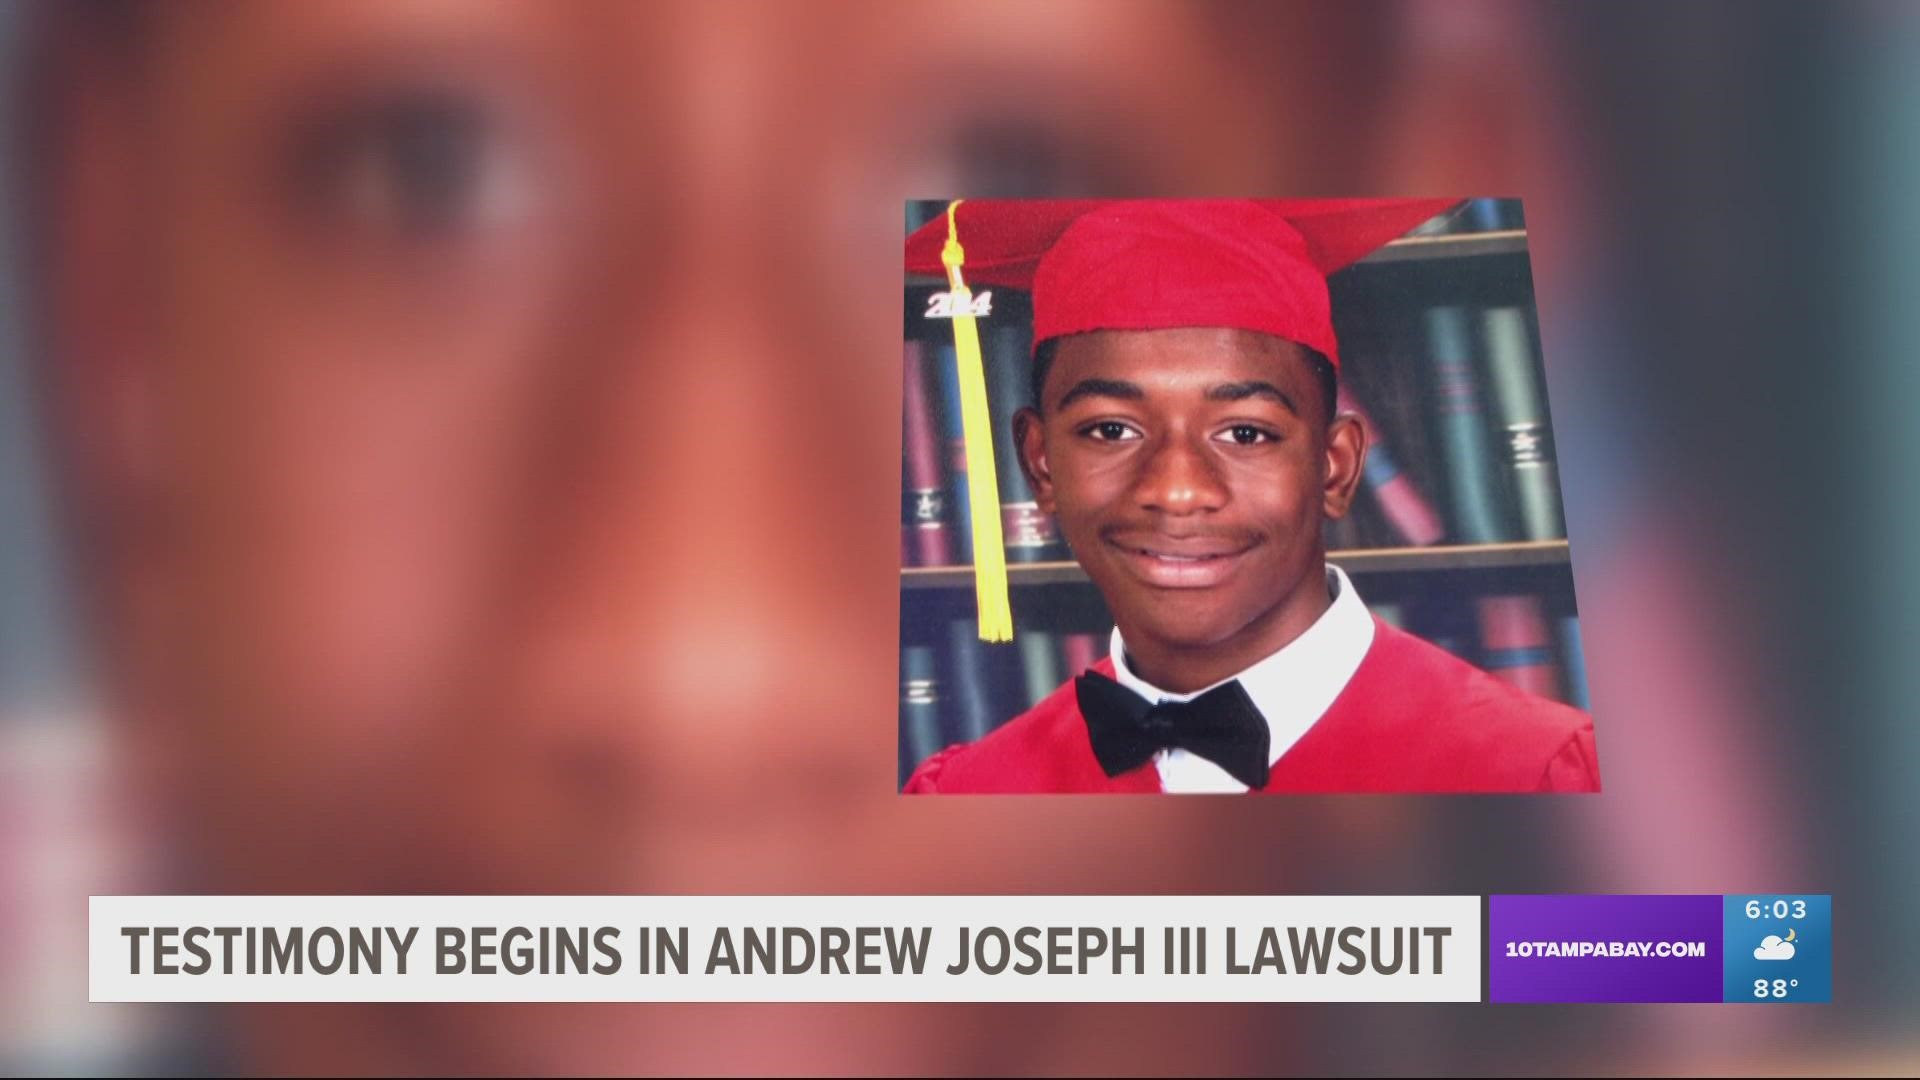 Andrew Joseph III was 14 years old when he was hit and killed by a car while crossing I-4 back in 2014 after being ejected from the Florida State Fair.